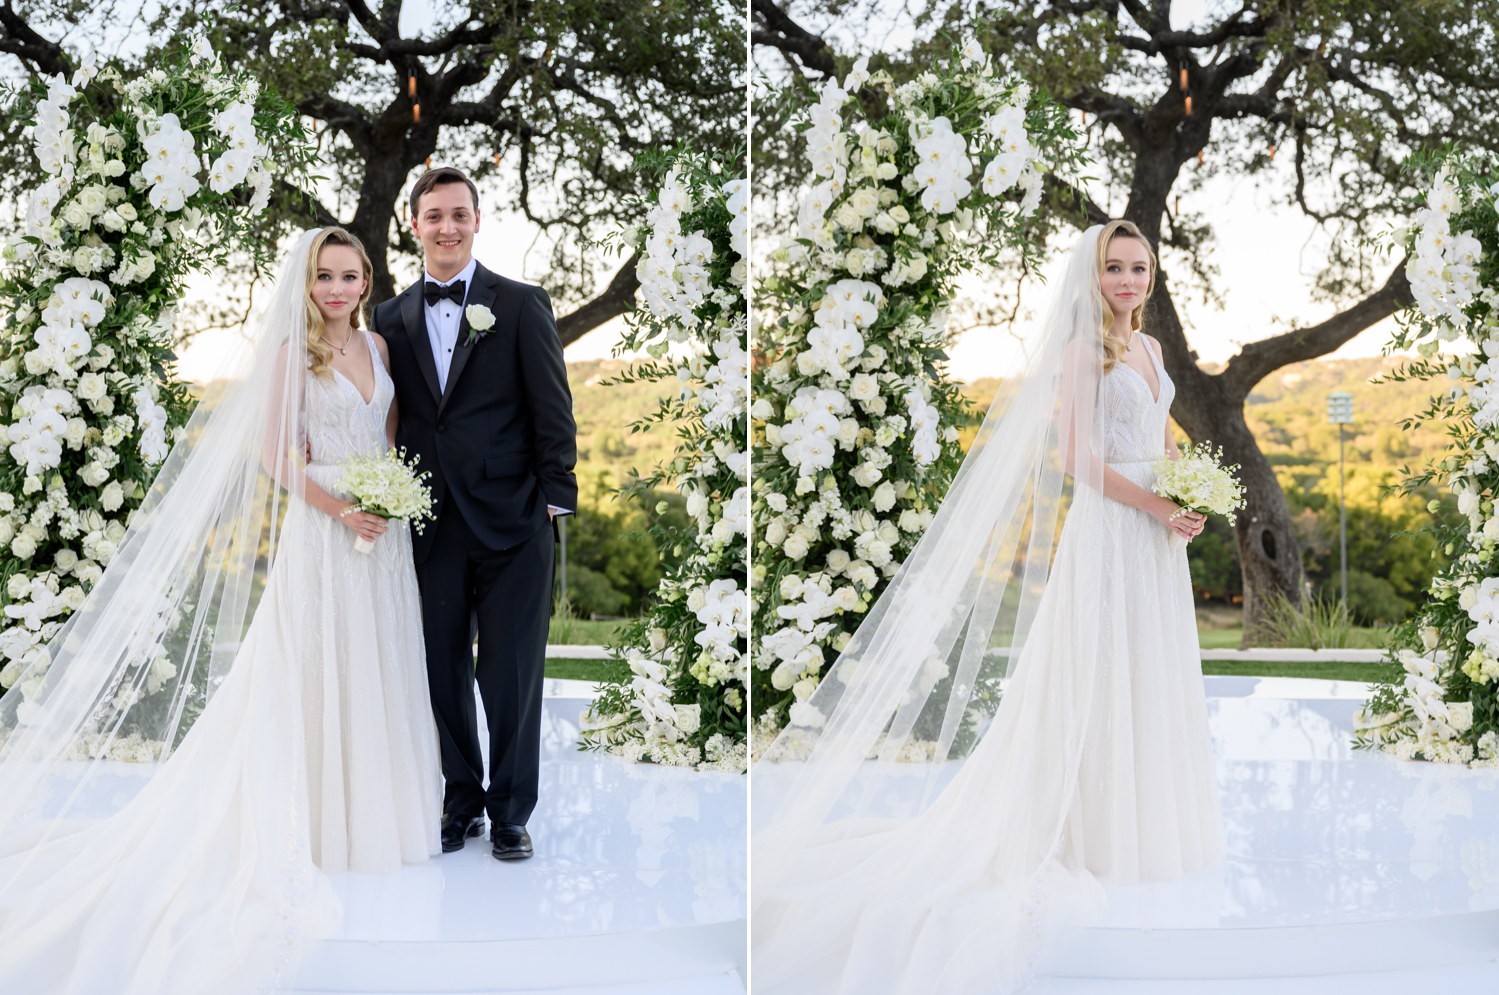 Left: The bride and groom stand together at the aisle, covered in white flowers. Right: The bride stands at the aisle, covered in white flowers